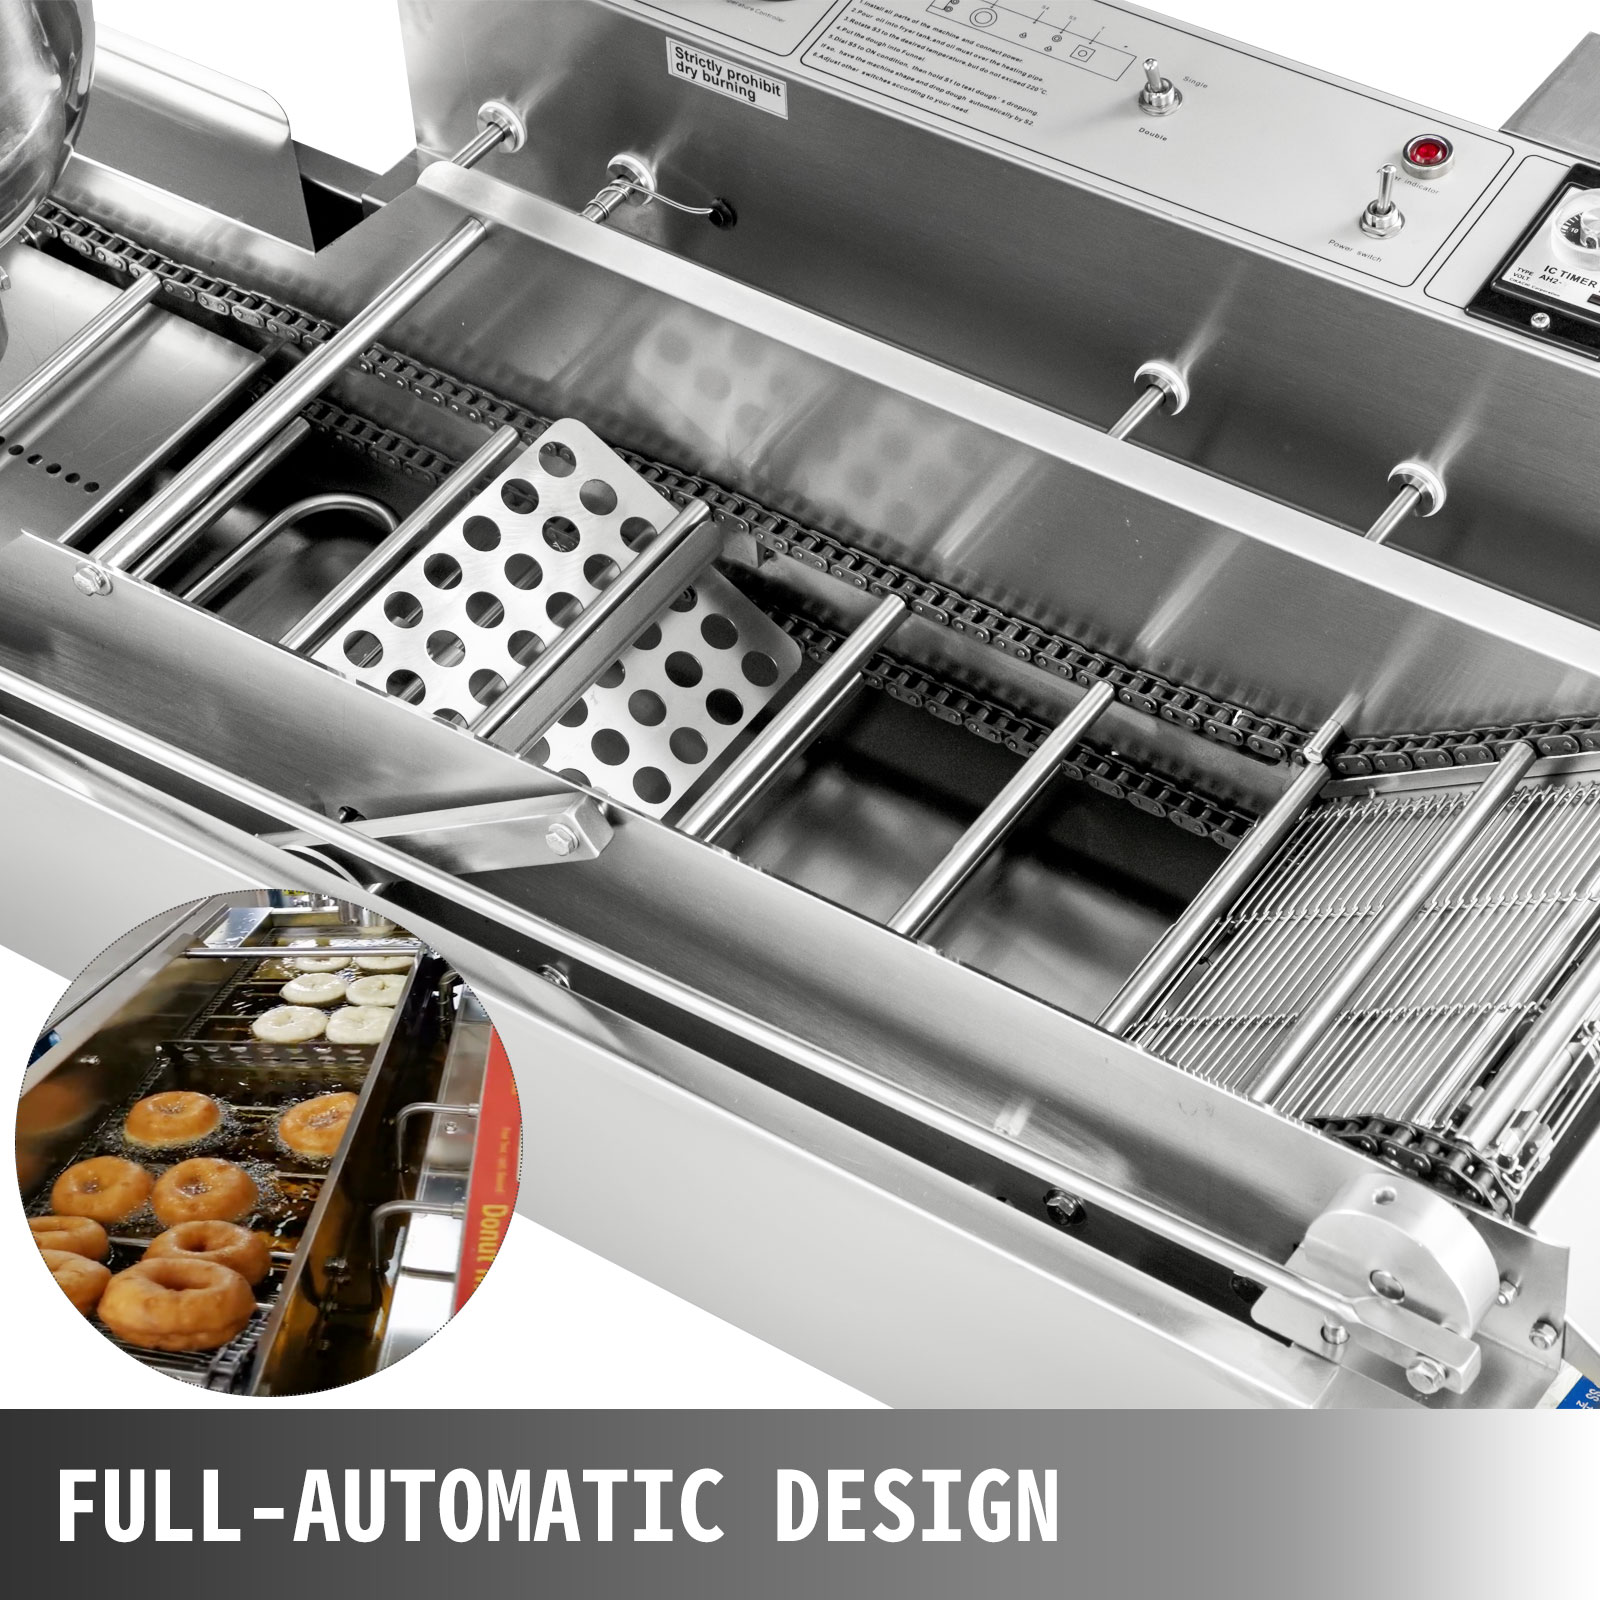 VEVOR Commercial Automatic Donut Making Machine Rows Auto Doughnut Maker  7L Hopper Donut Maker with Sizes Moulds 110V Doughnut Fryer with  Intelligent Control Panel 304 Stainless Steel Auto Donut VEVOR US